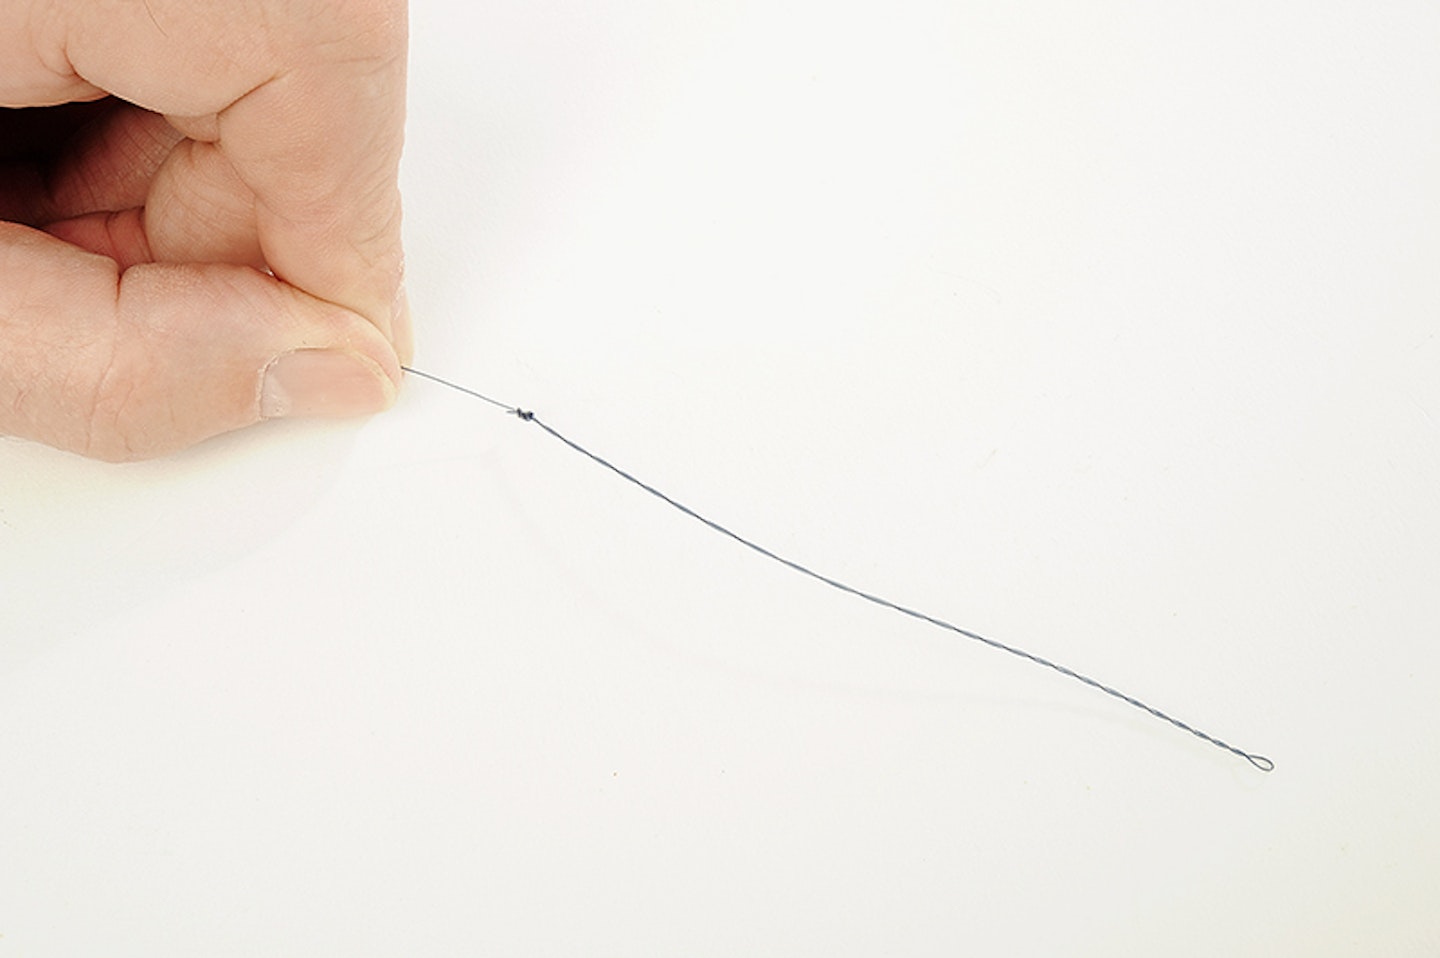 You’re now left with a twisted section of line of around 6ins long, called a boom. Trim the tag end to reduce line spin when reeling in.